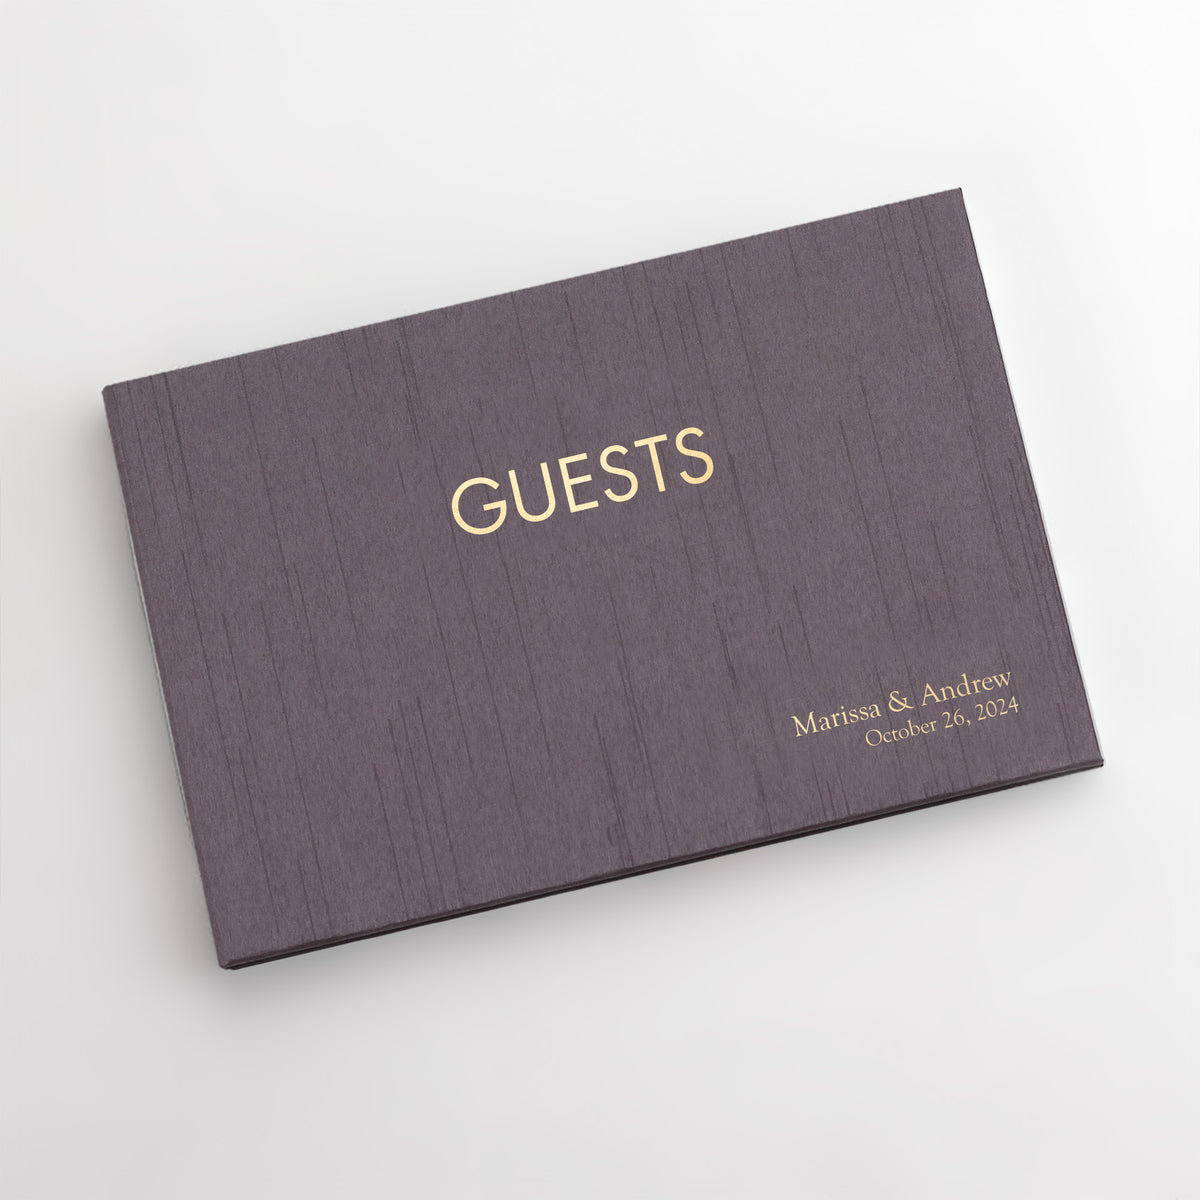 Guestbook Embossed with “Guests” | Cover: Amethyst Silk | Available Personalized